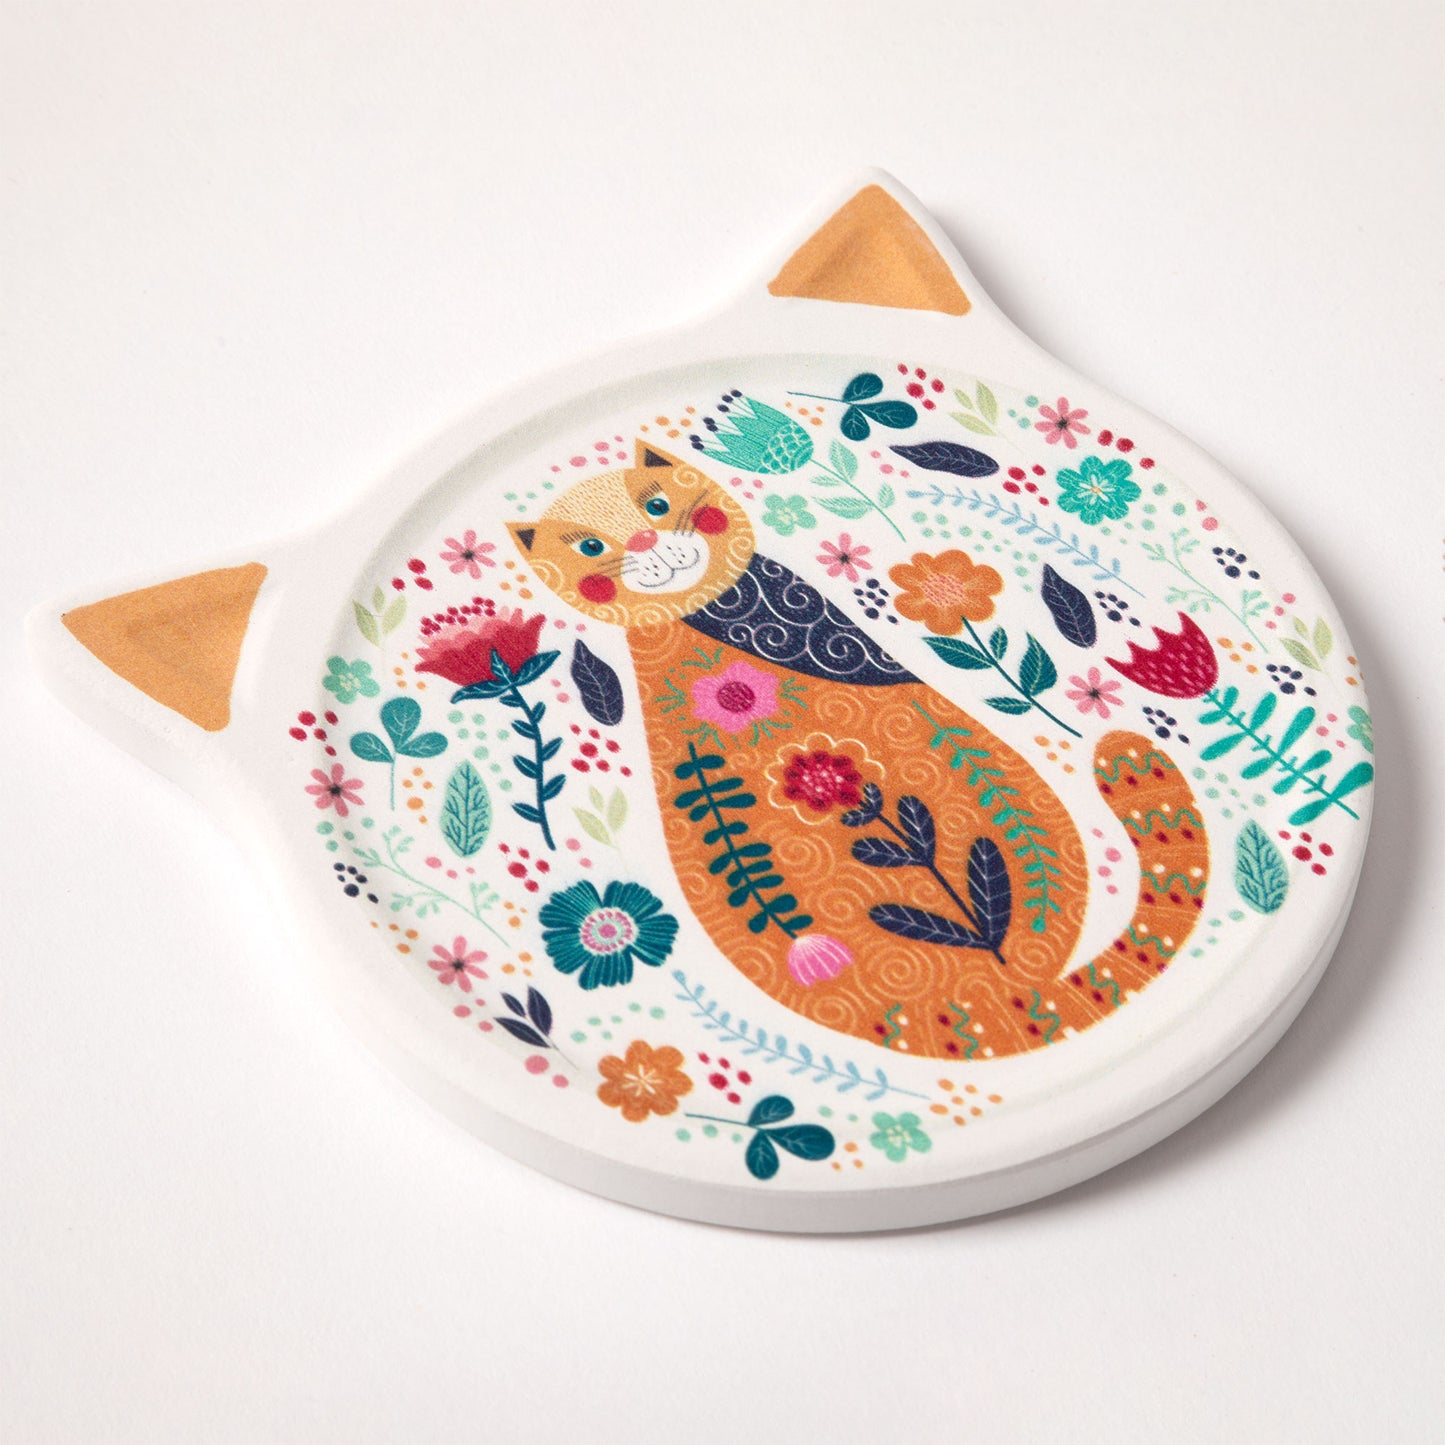 Cat Beauty Water Absorbent Coasters - Set of 4